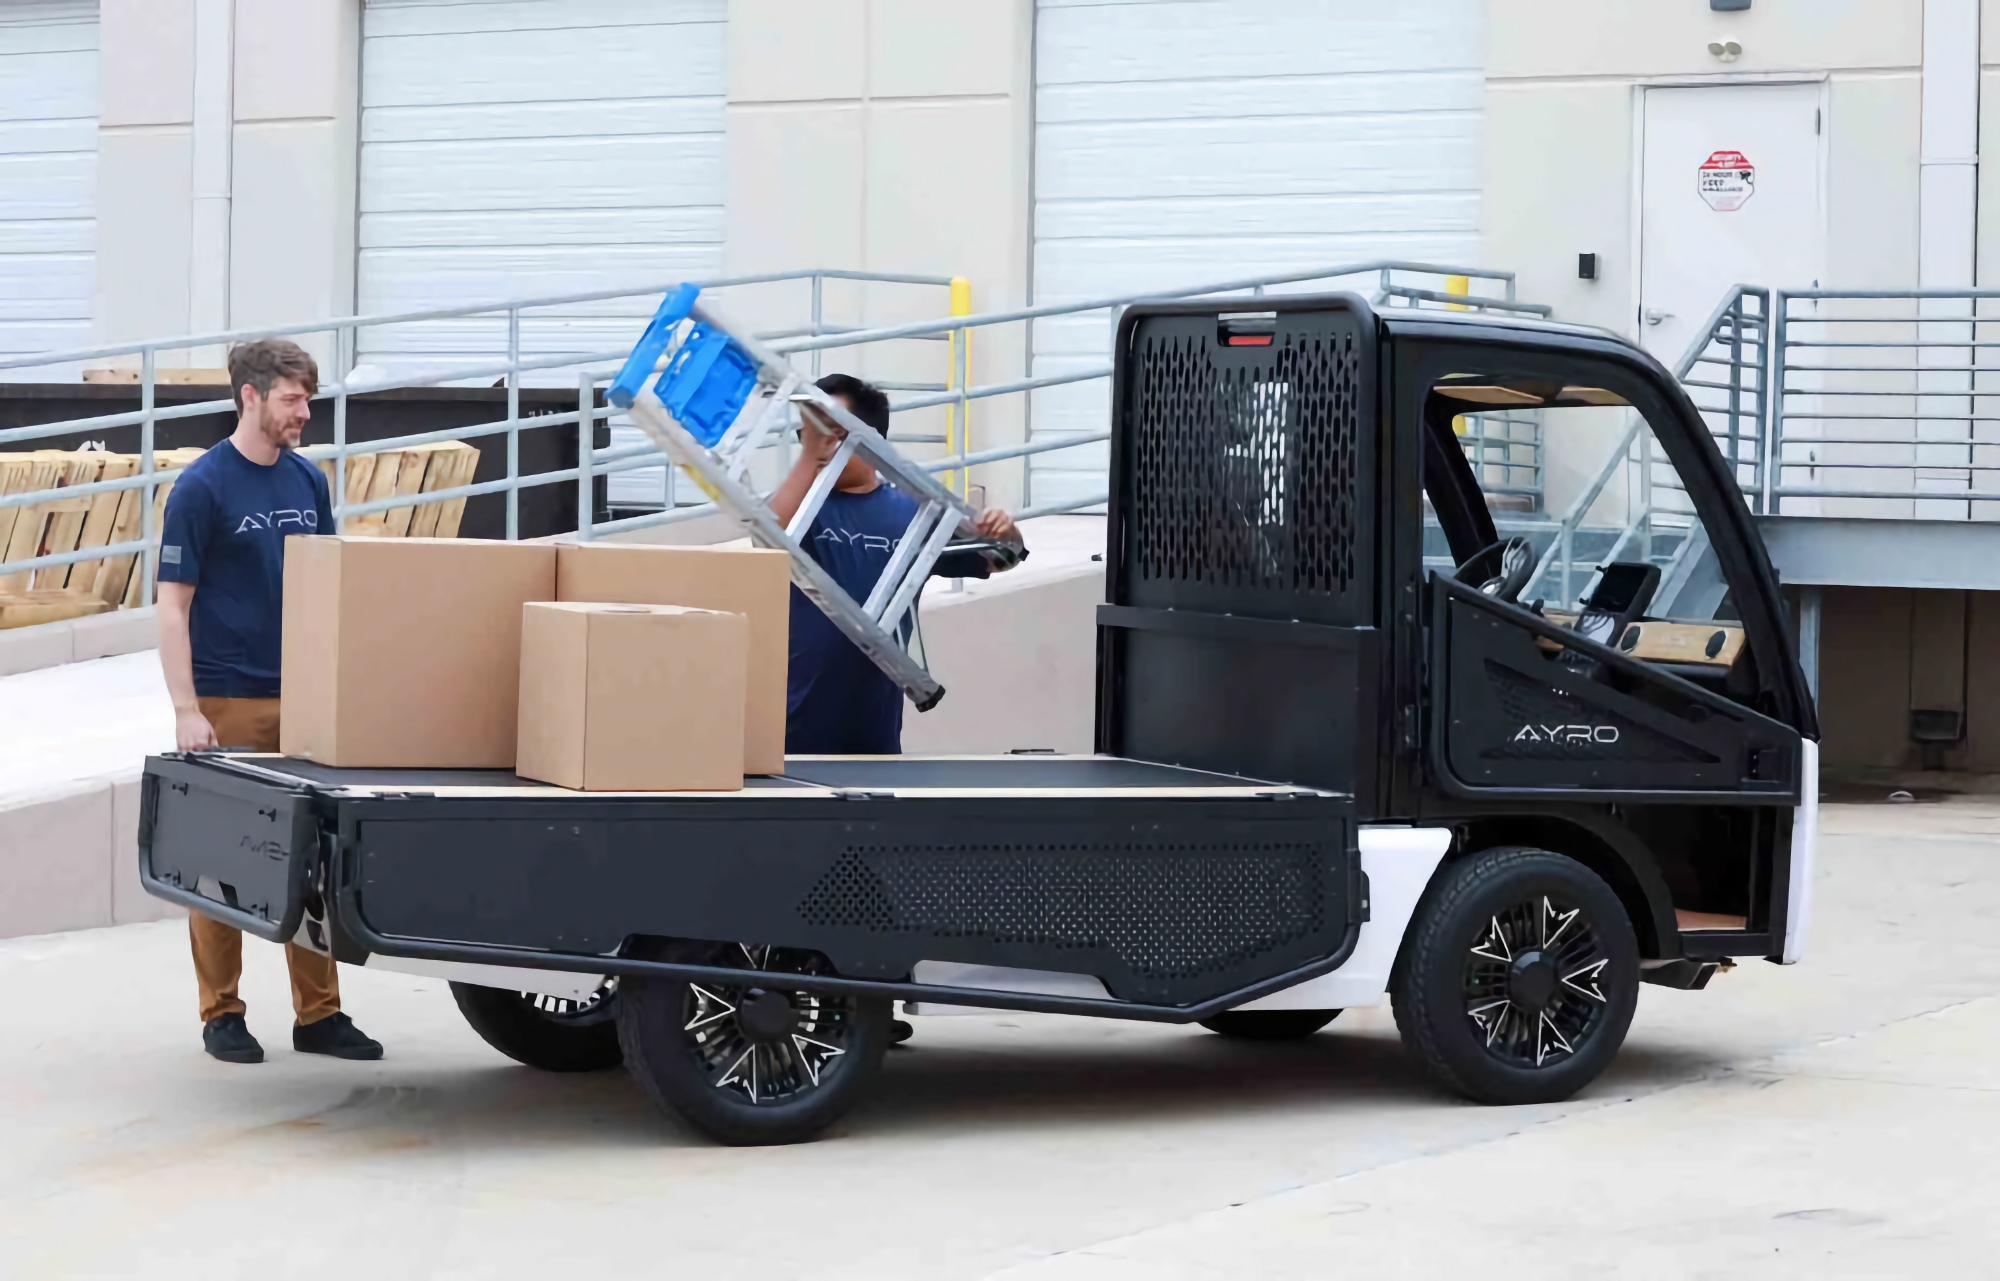 AYRO has opened a pre-order for the Vanish: a compact American electric truck with a modular design